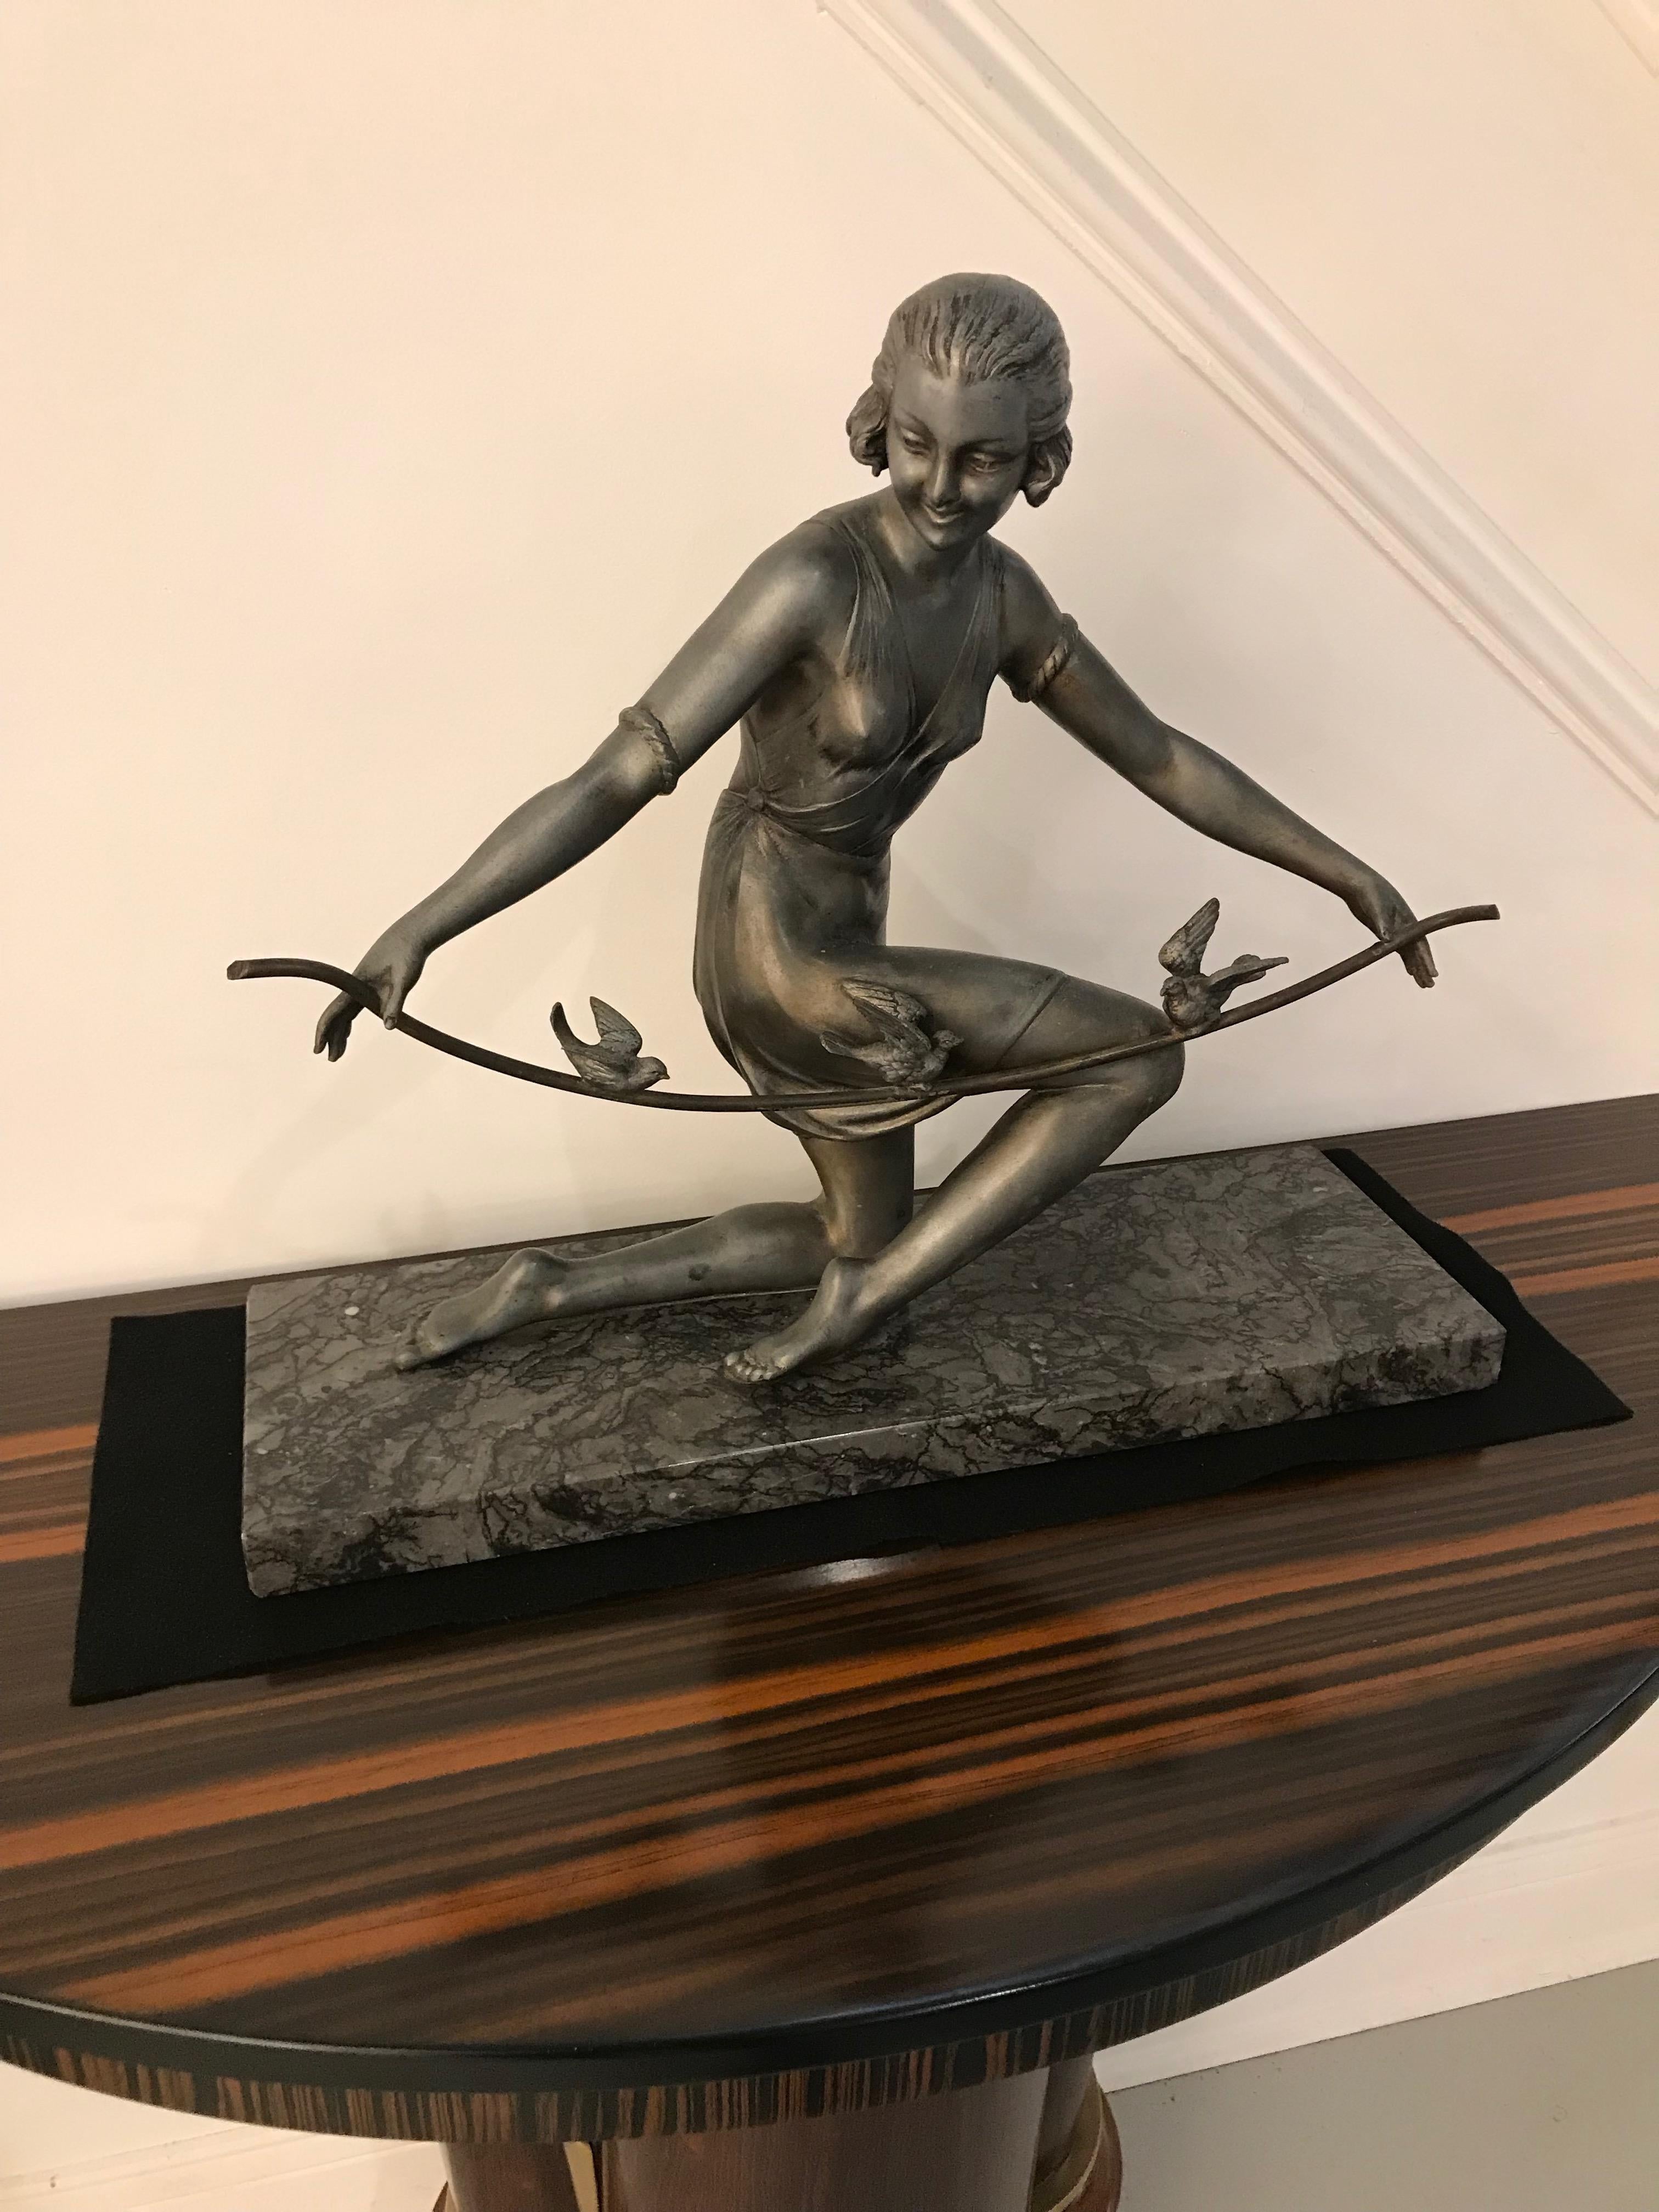 French Art Deco female sculpture on marble. Deco girl holding branch with birds playing. Adding the perfect deco decor to any space.